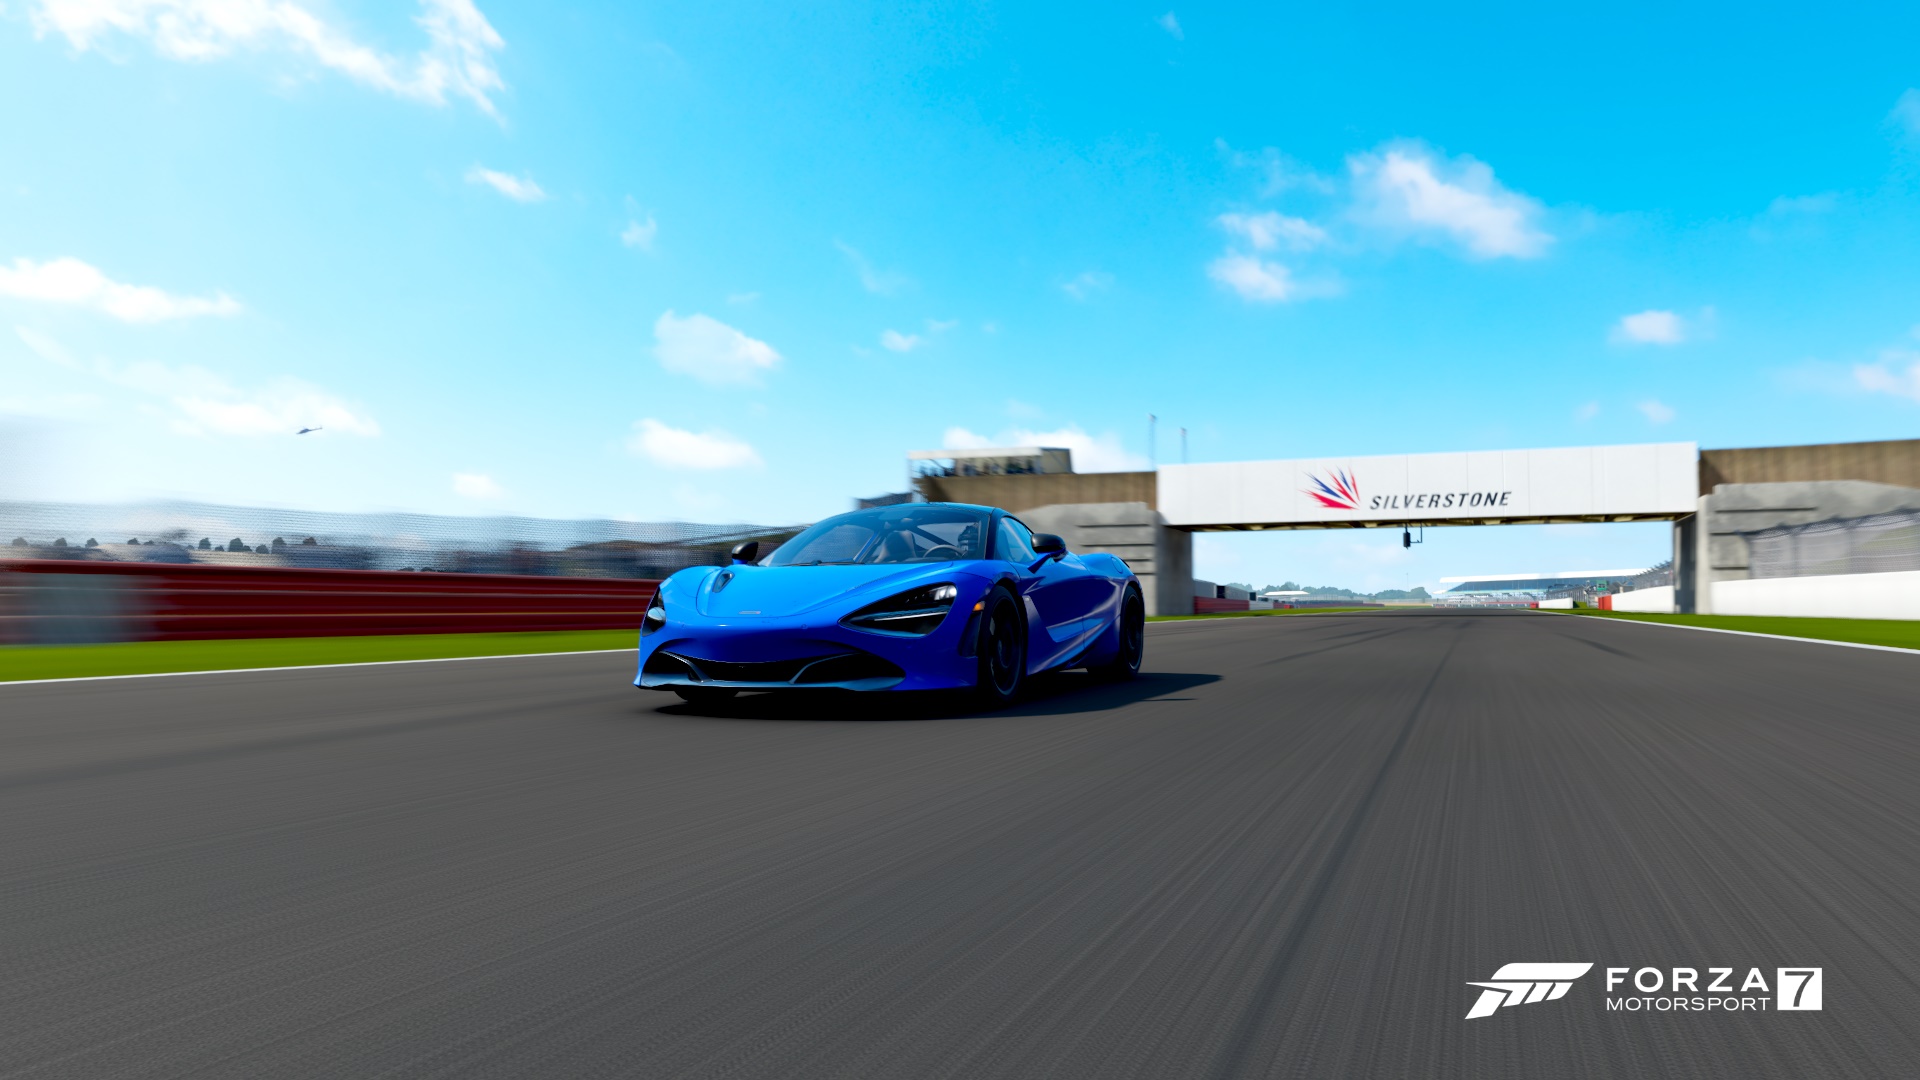 Forza McLaren Car Forza Motorsport Forza Motorsport 7 Front Angle View 1920x1080